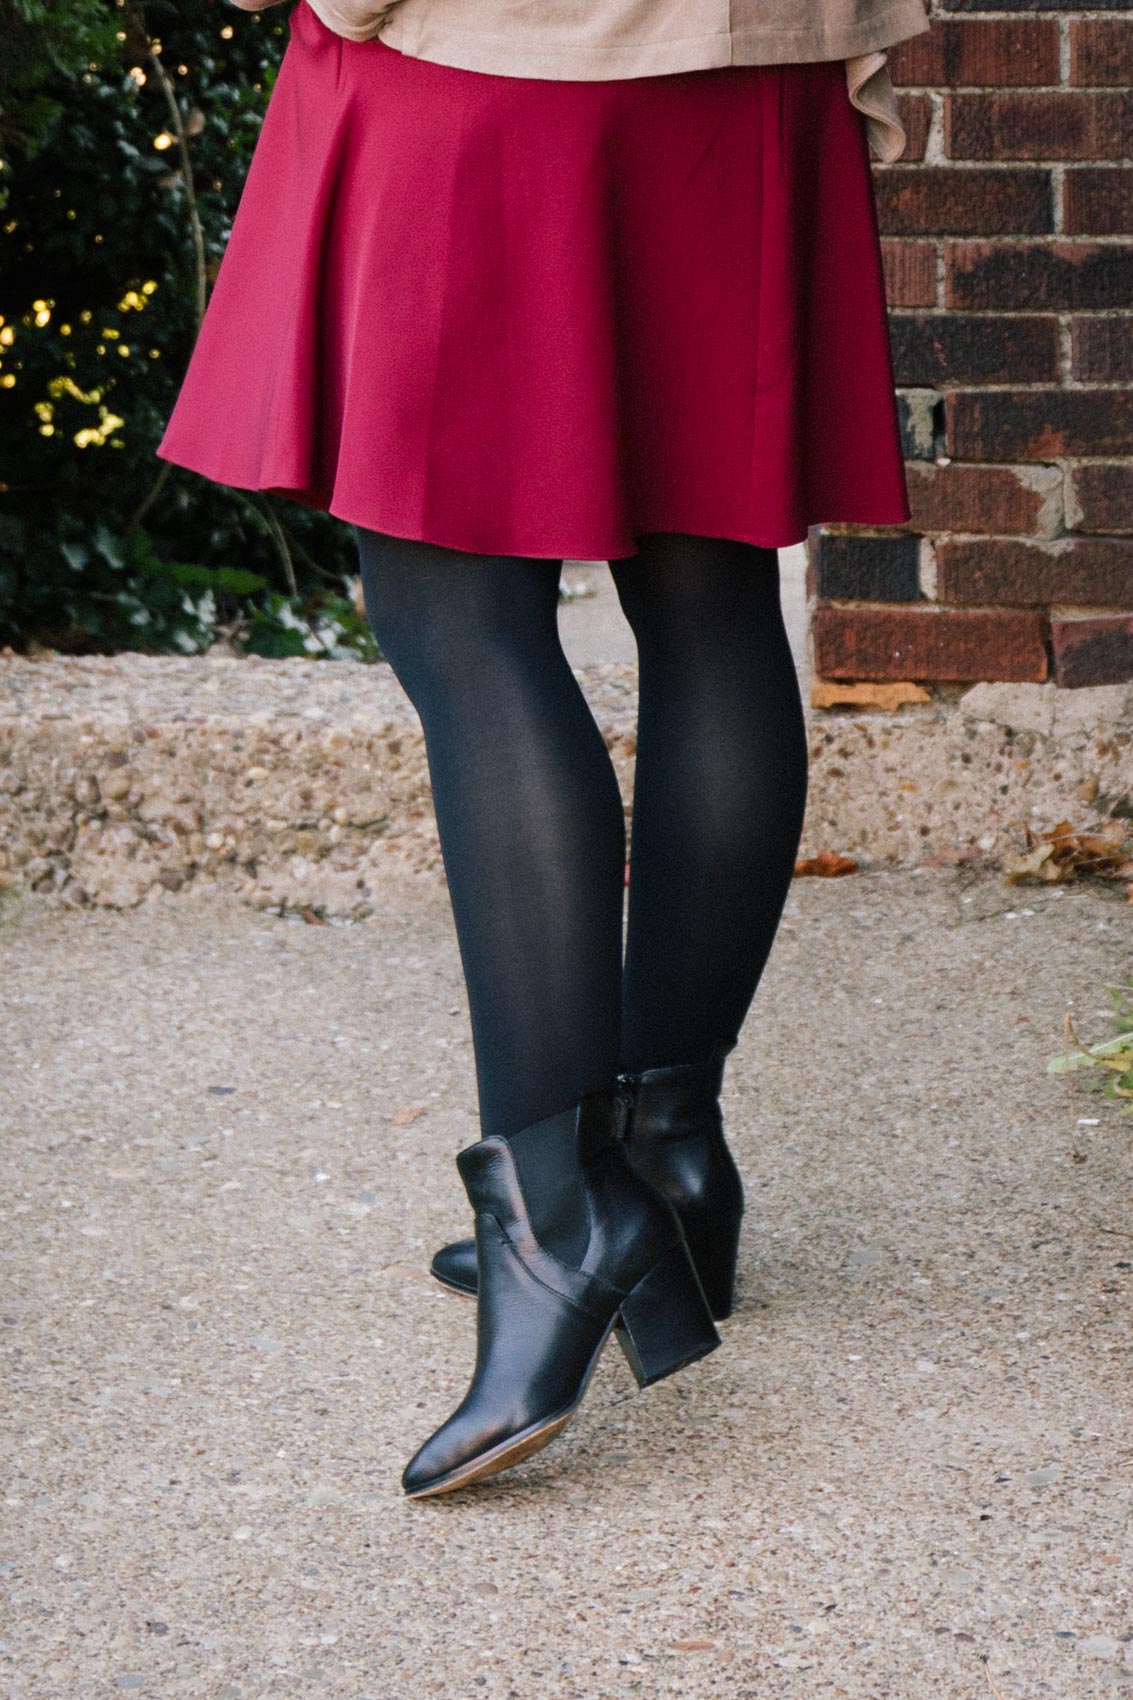 Red Christmas dress outfit styled with black ankle boots and tights. 